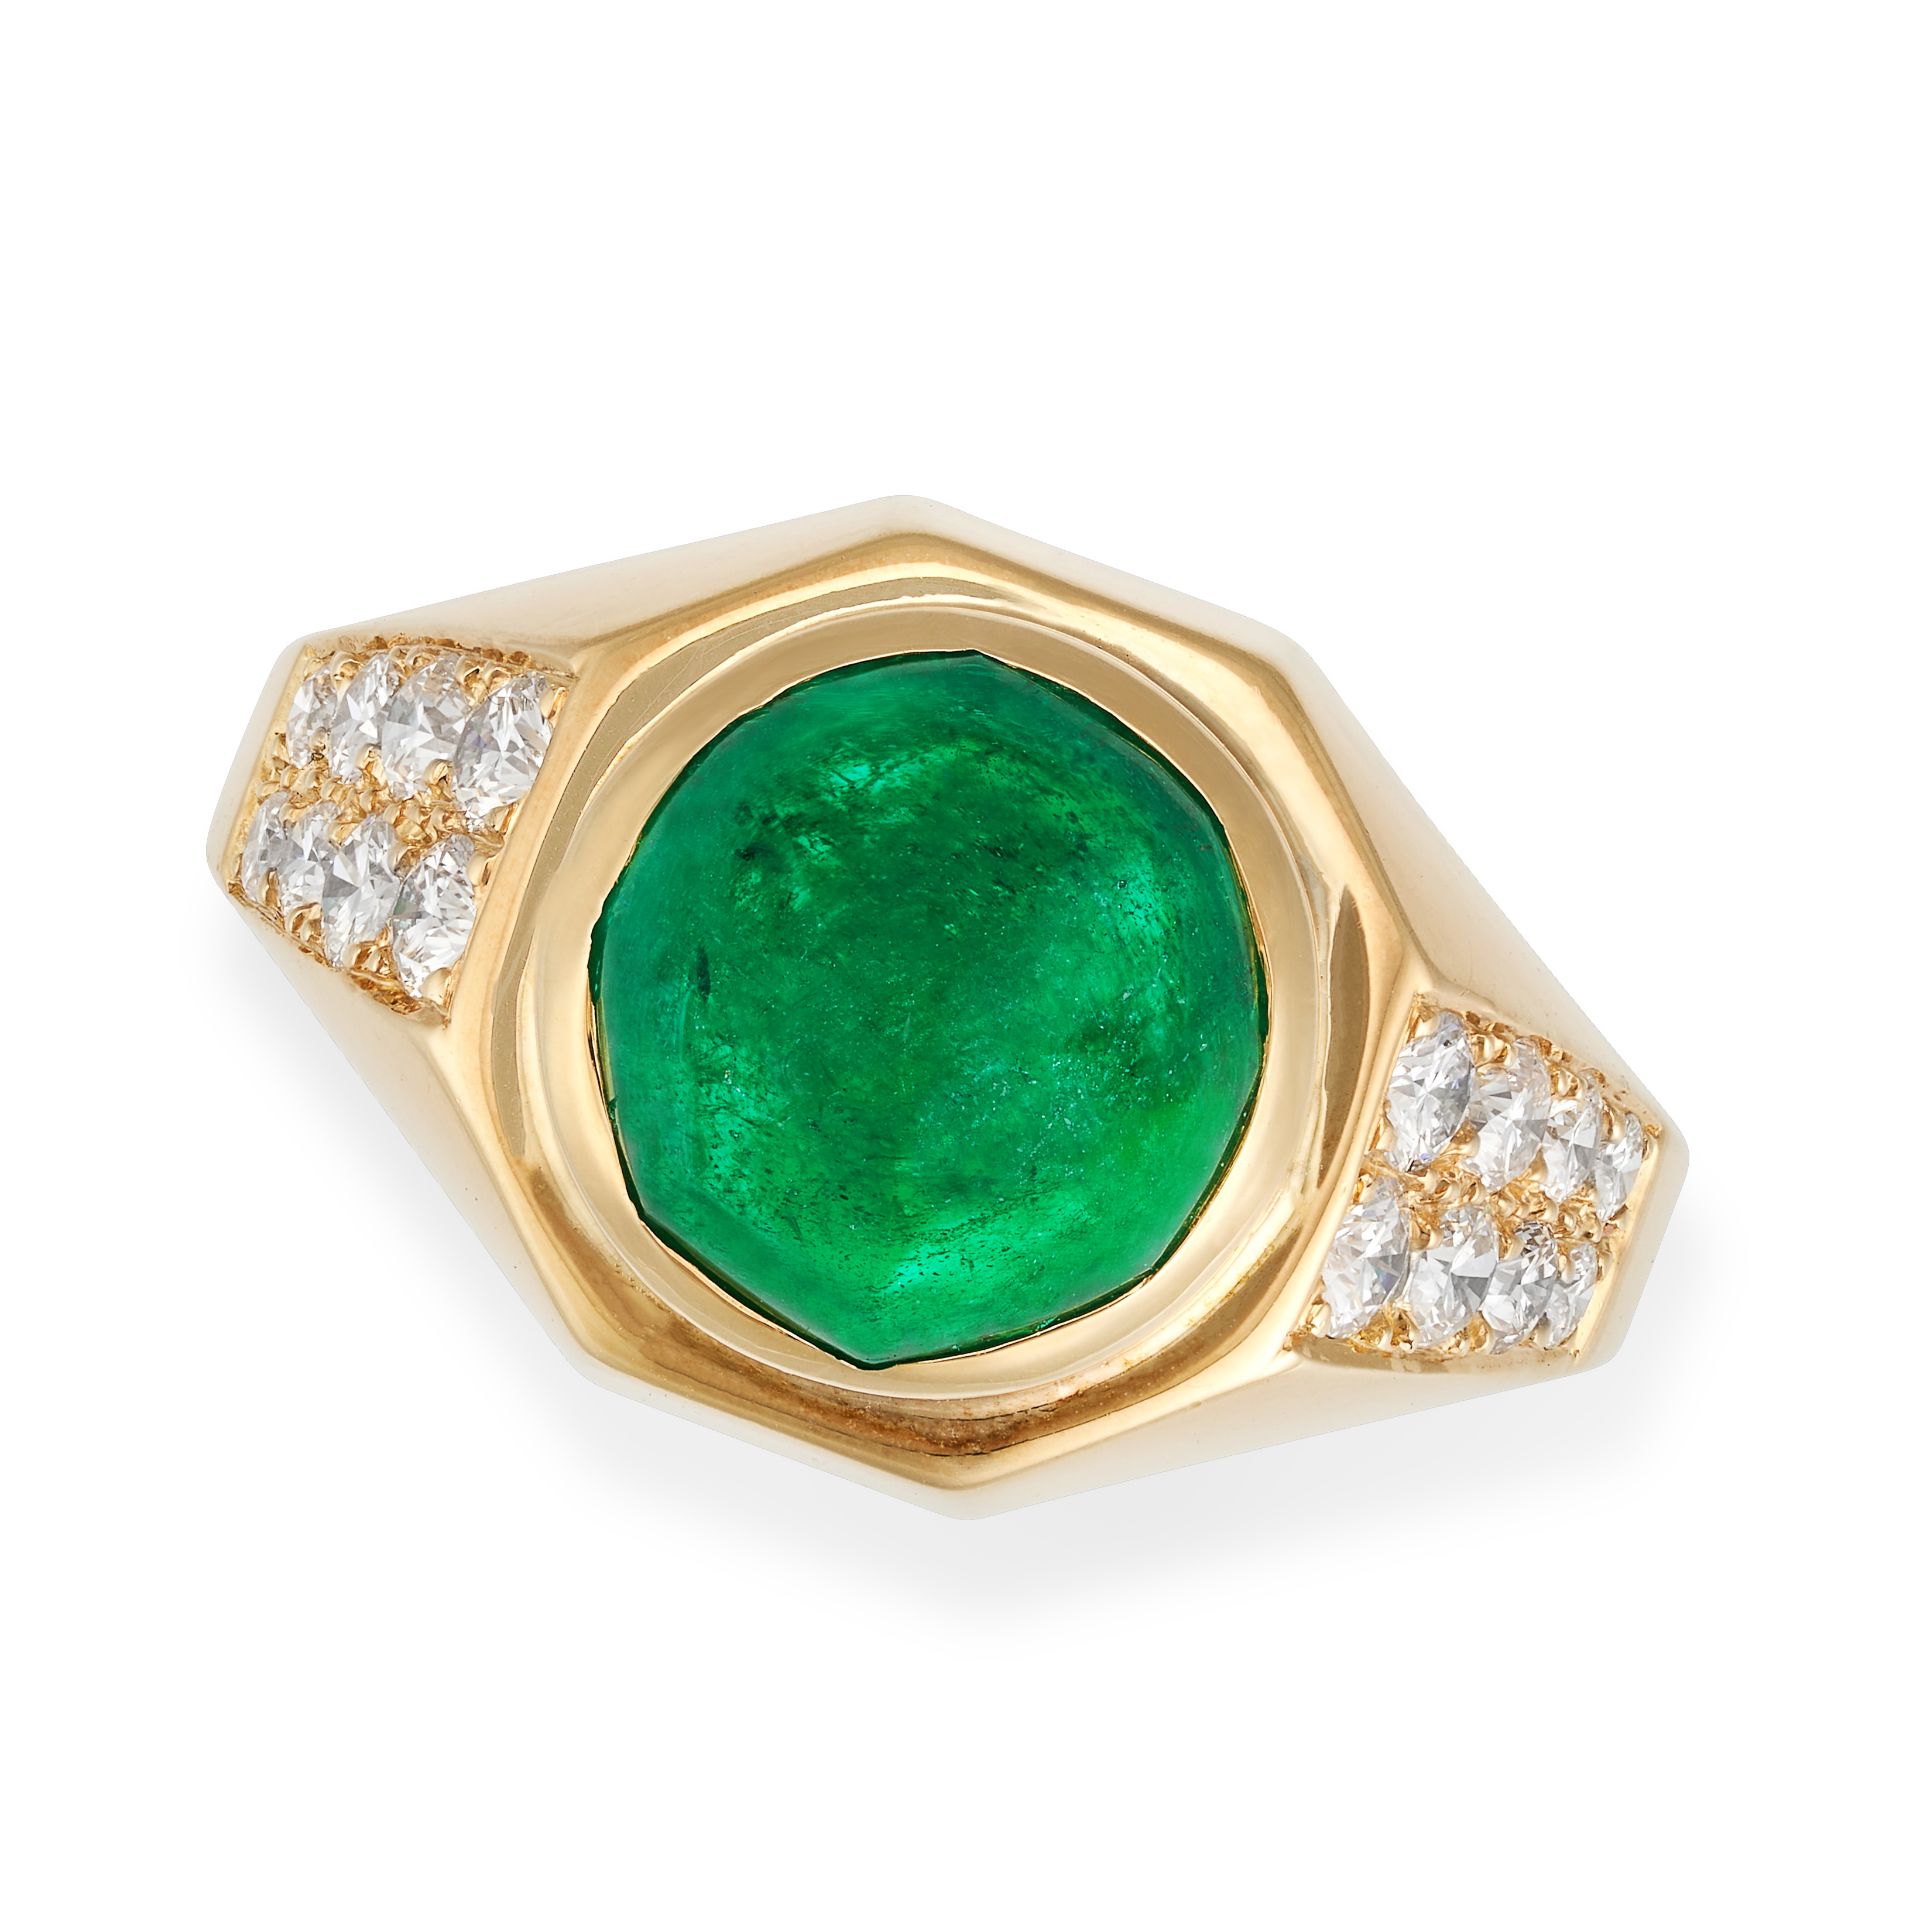 BULGARI, A FINE EMERALD AND DIAMOND RING, 1960 in 18ct yellow gold, set with a cabochon emerald o...